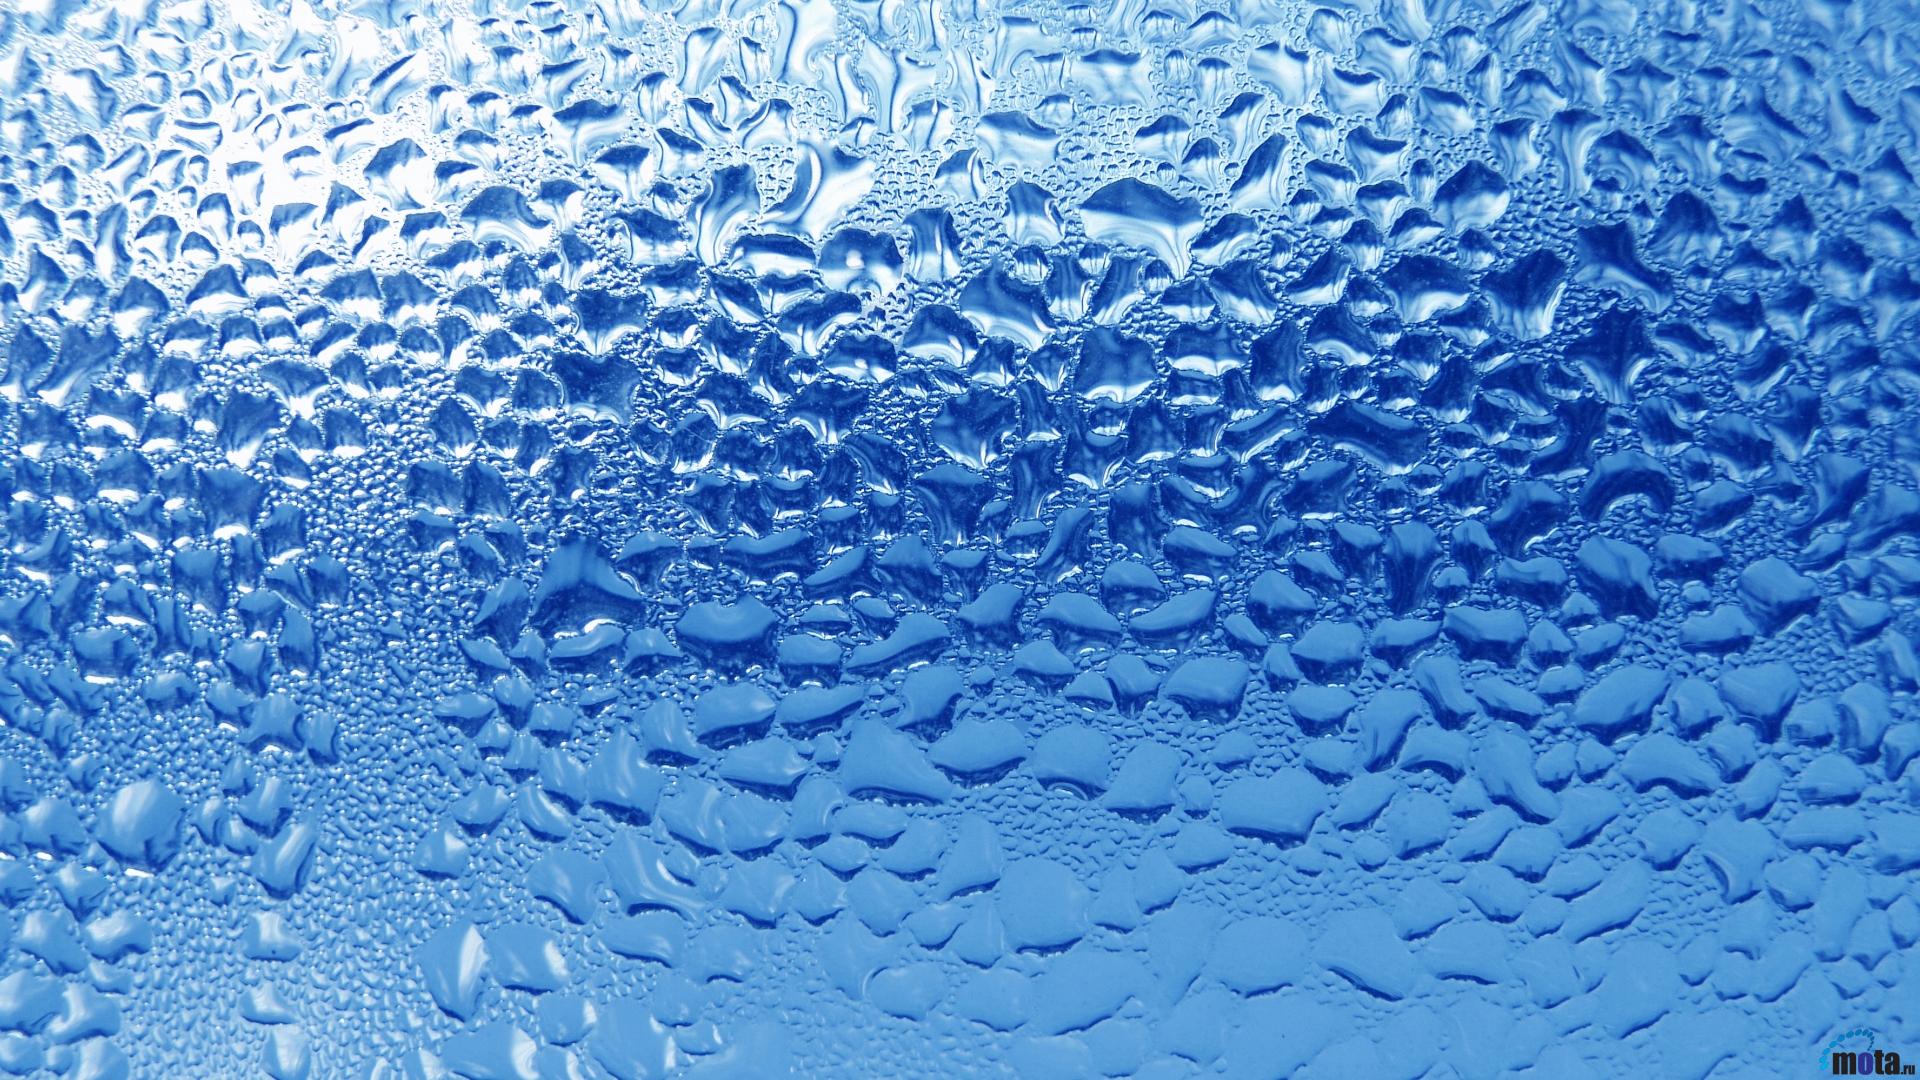 Download Wallpaper Water Drops on Window Glass Surface 1920 x 1080